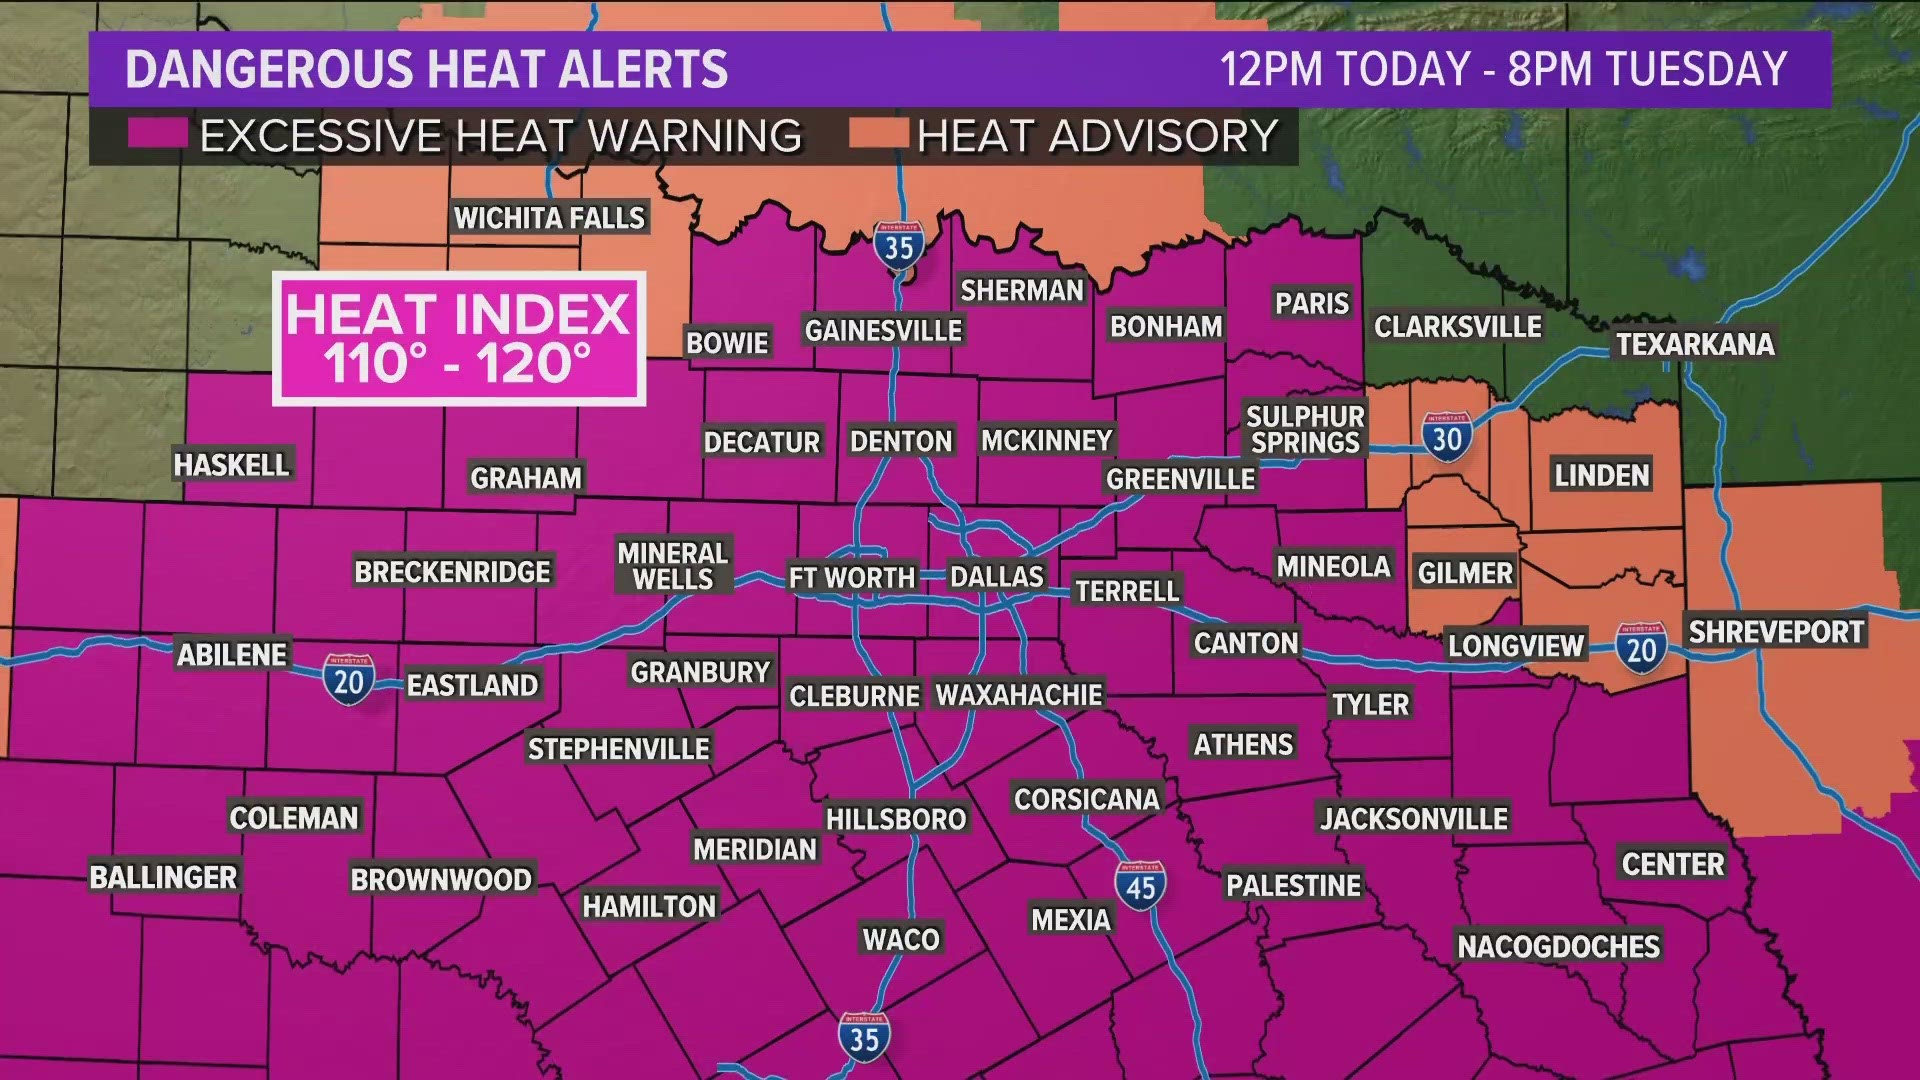 You can't escape the heat in Texas. Please find time to take breaks and drink lots of water if you have to be outside.